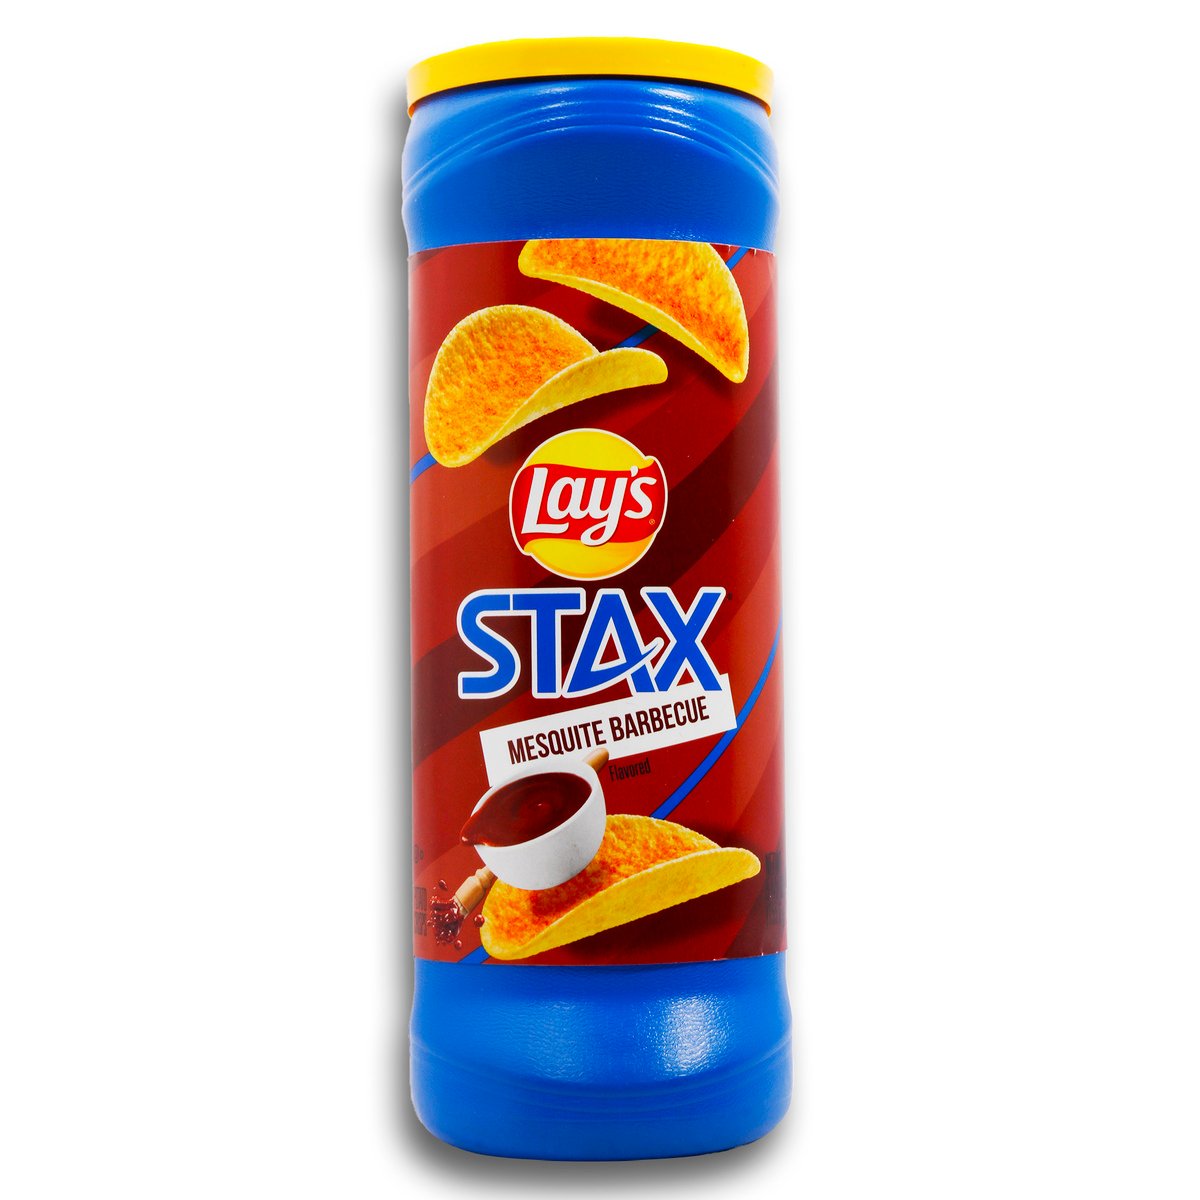 Lay's Stax Mesquite Barbecue 155.9g